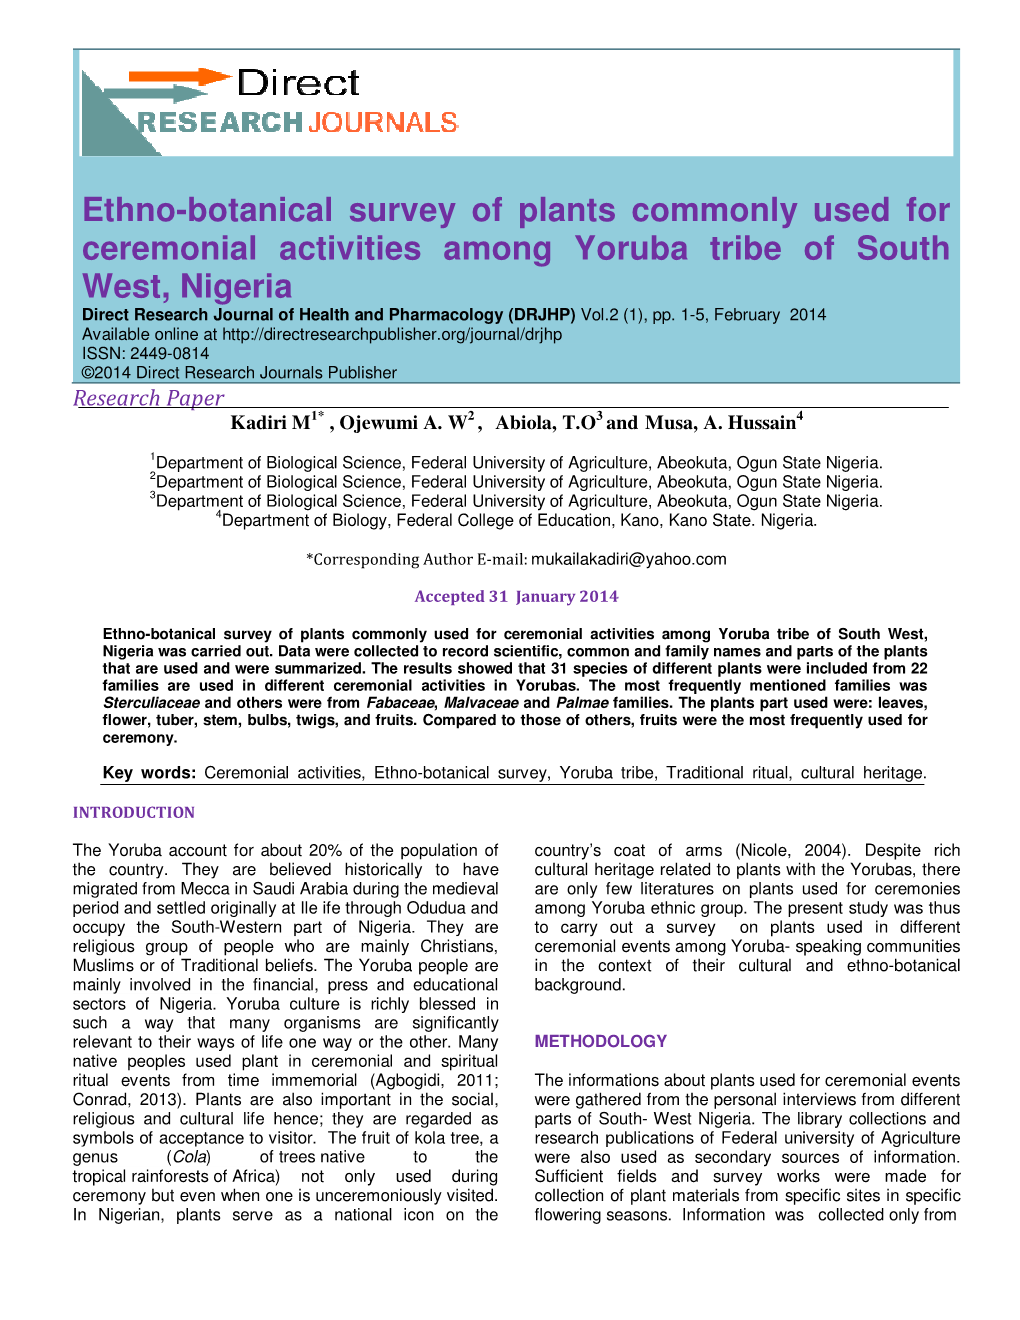 Ethno-Botanical Survey of Plants Commonly Used for Ceremonial